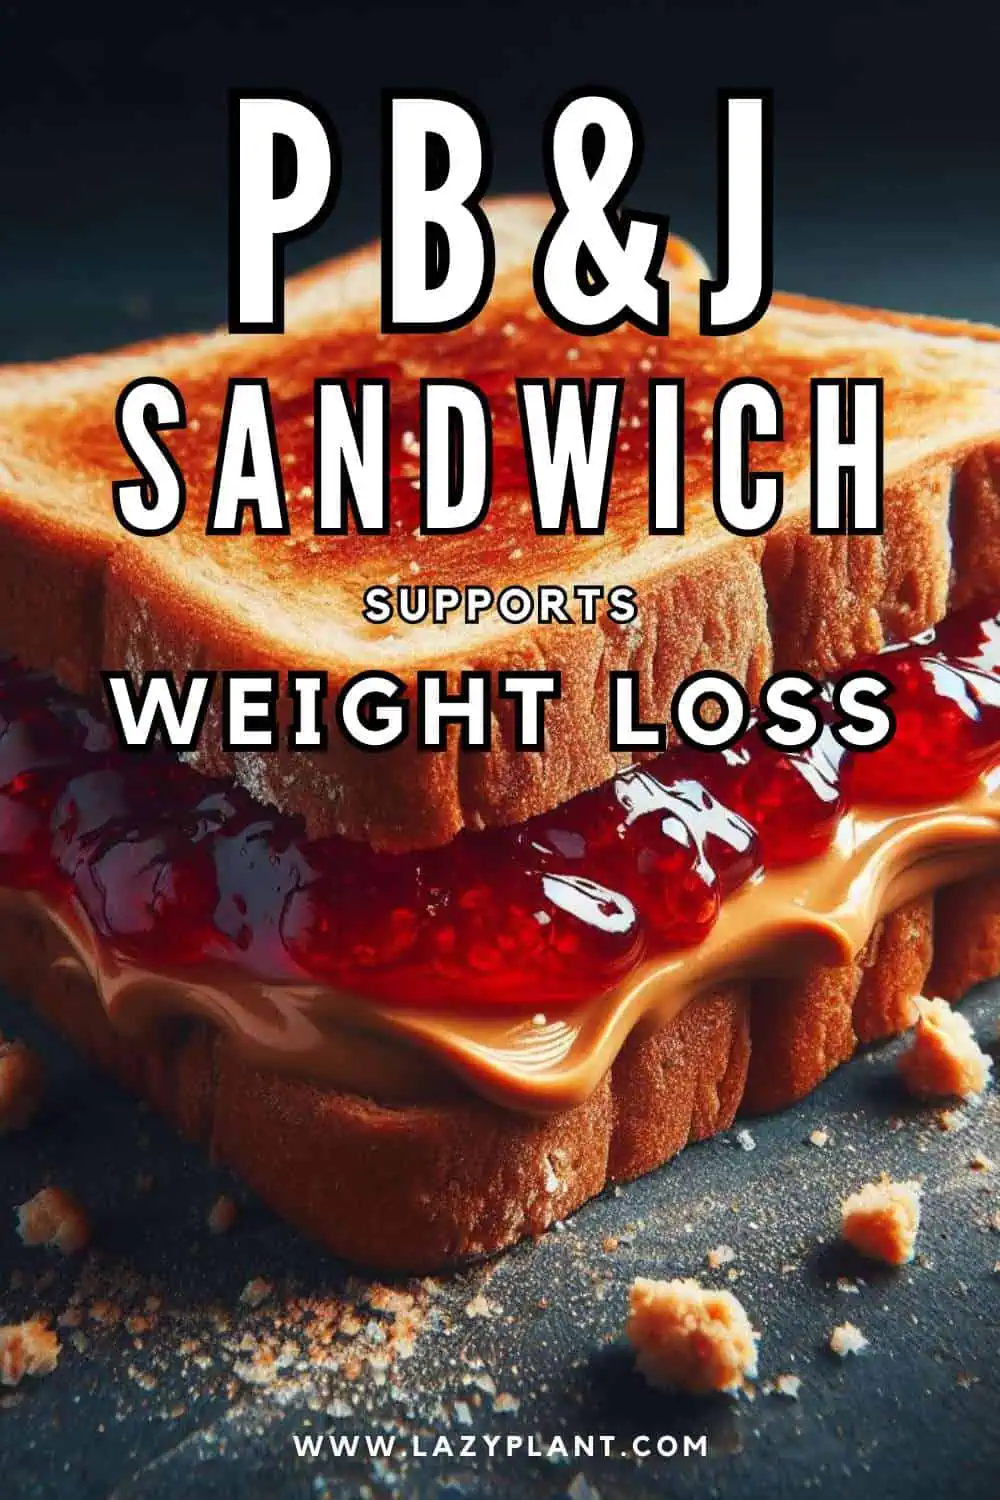 You can eat a PB&J sandwich every day while Dieting